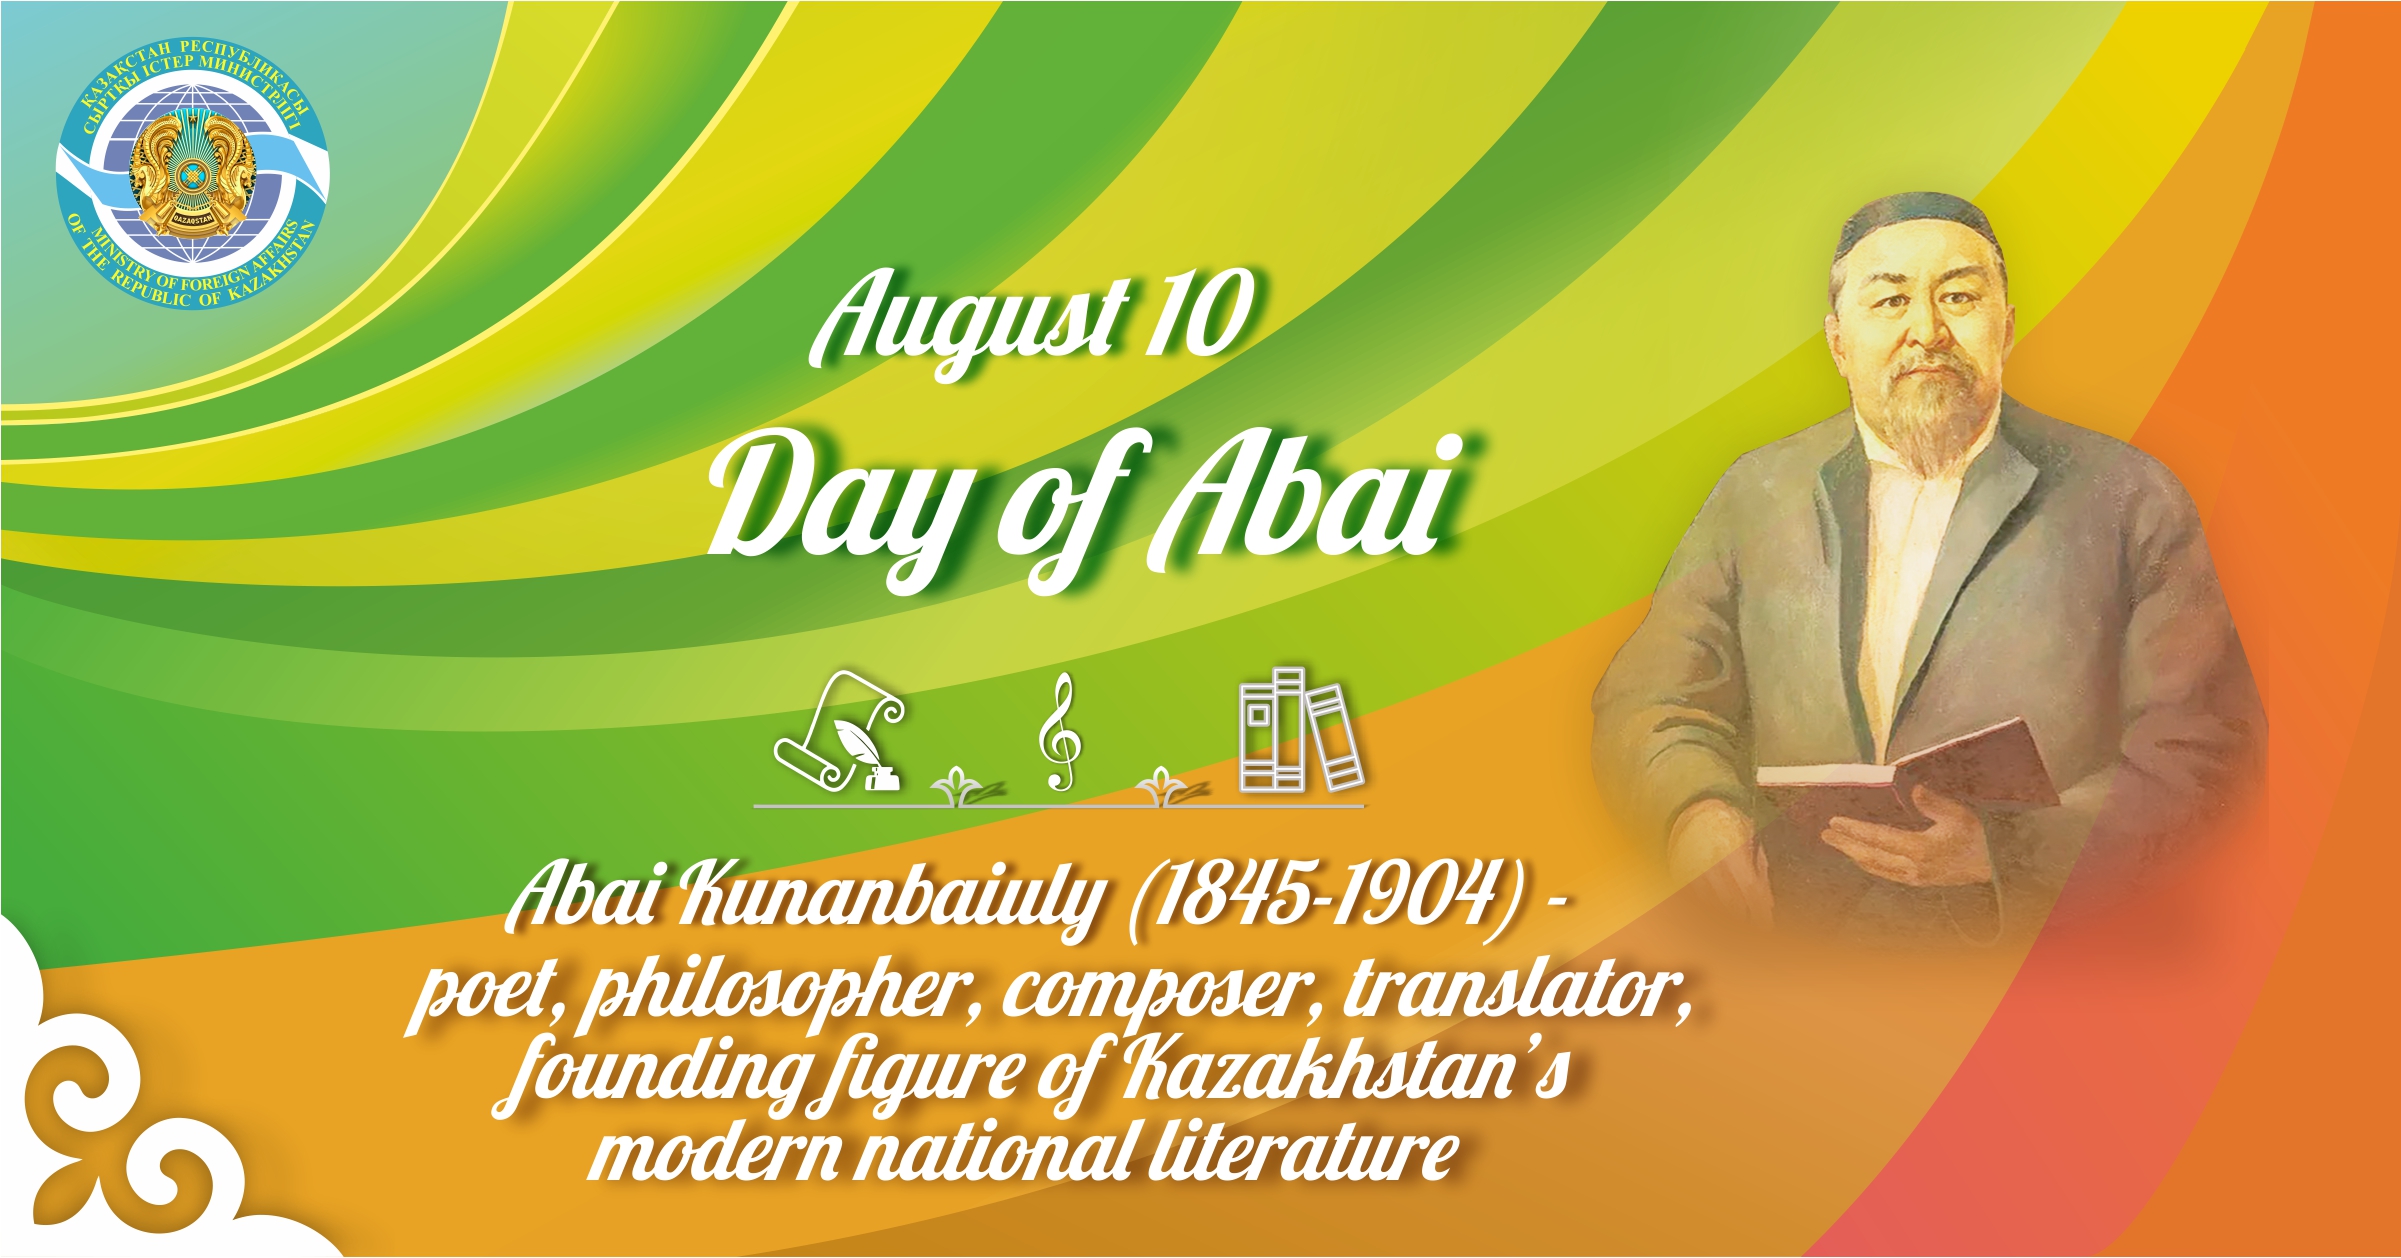 August 10 the 177th anniversary of birth of Abai Kunanbaiuly, an outstanding Kazakh poet, composer and philosopher